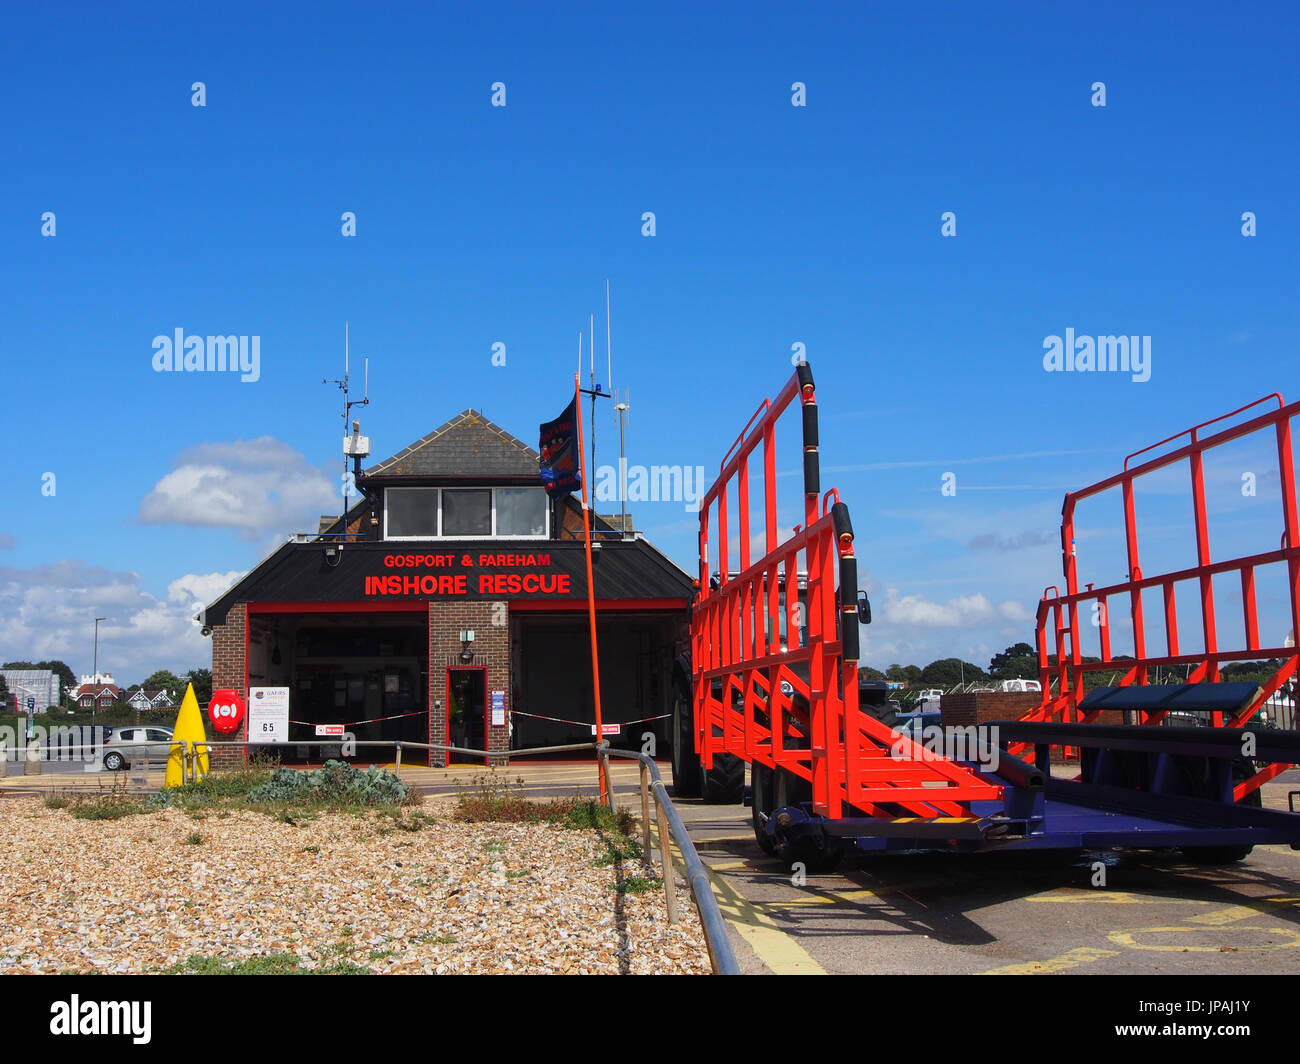 The Gosport and Fareham inshore rescue service lifeboat station in Stokes Bay, Gosport, England Stock Photo